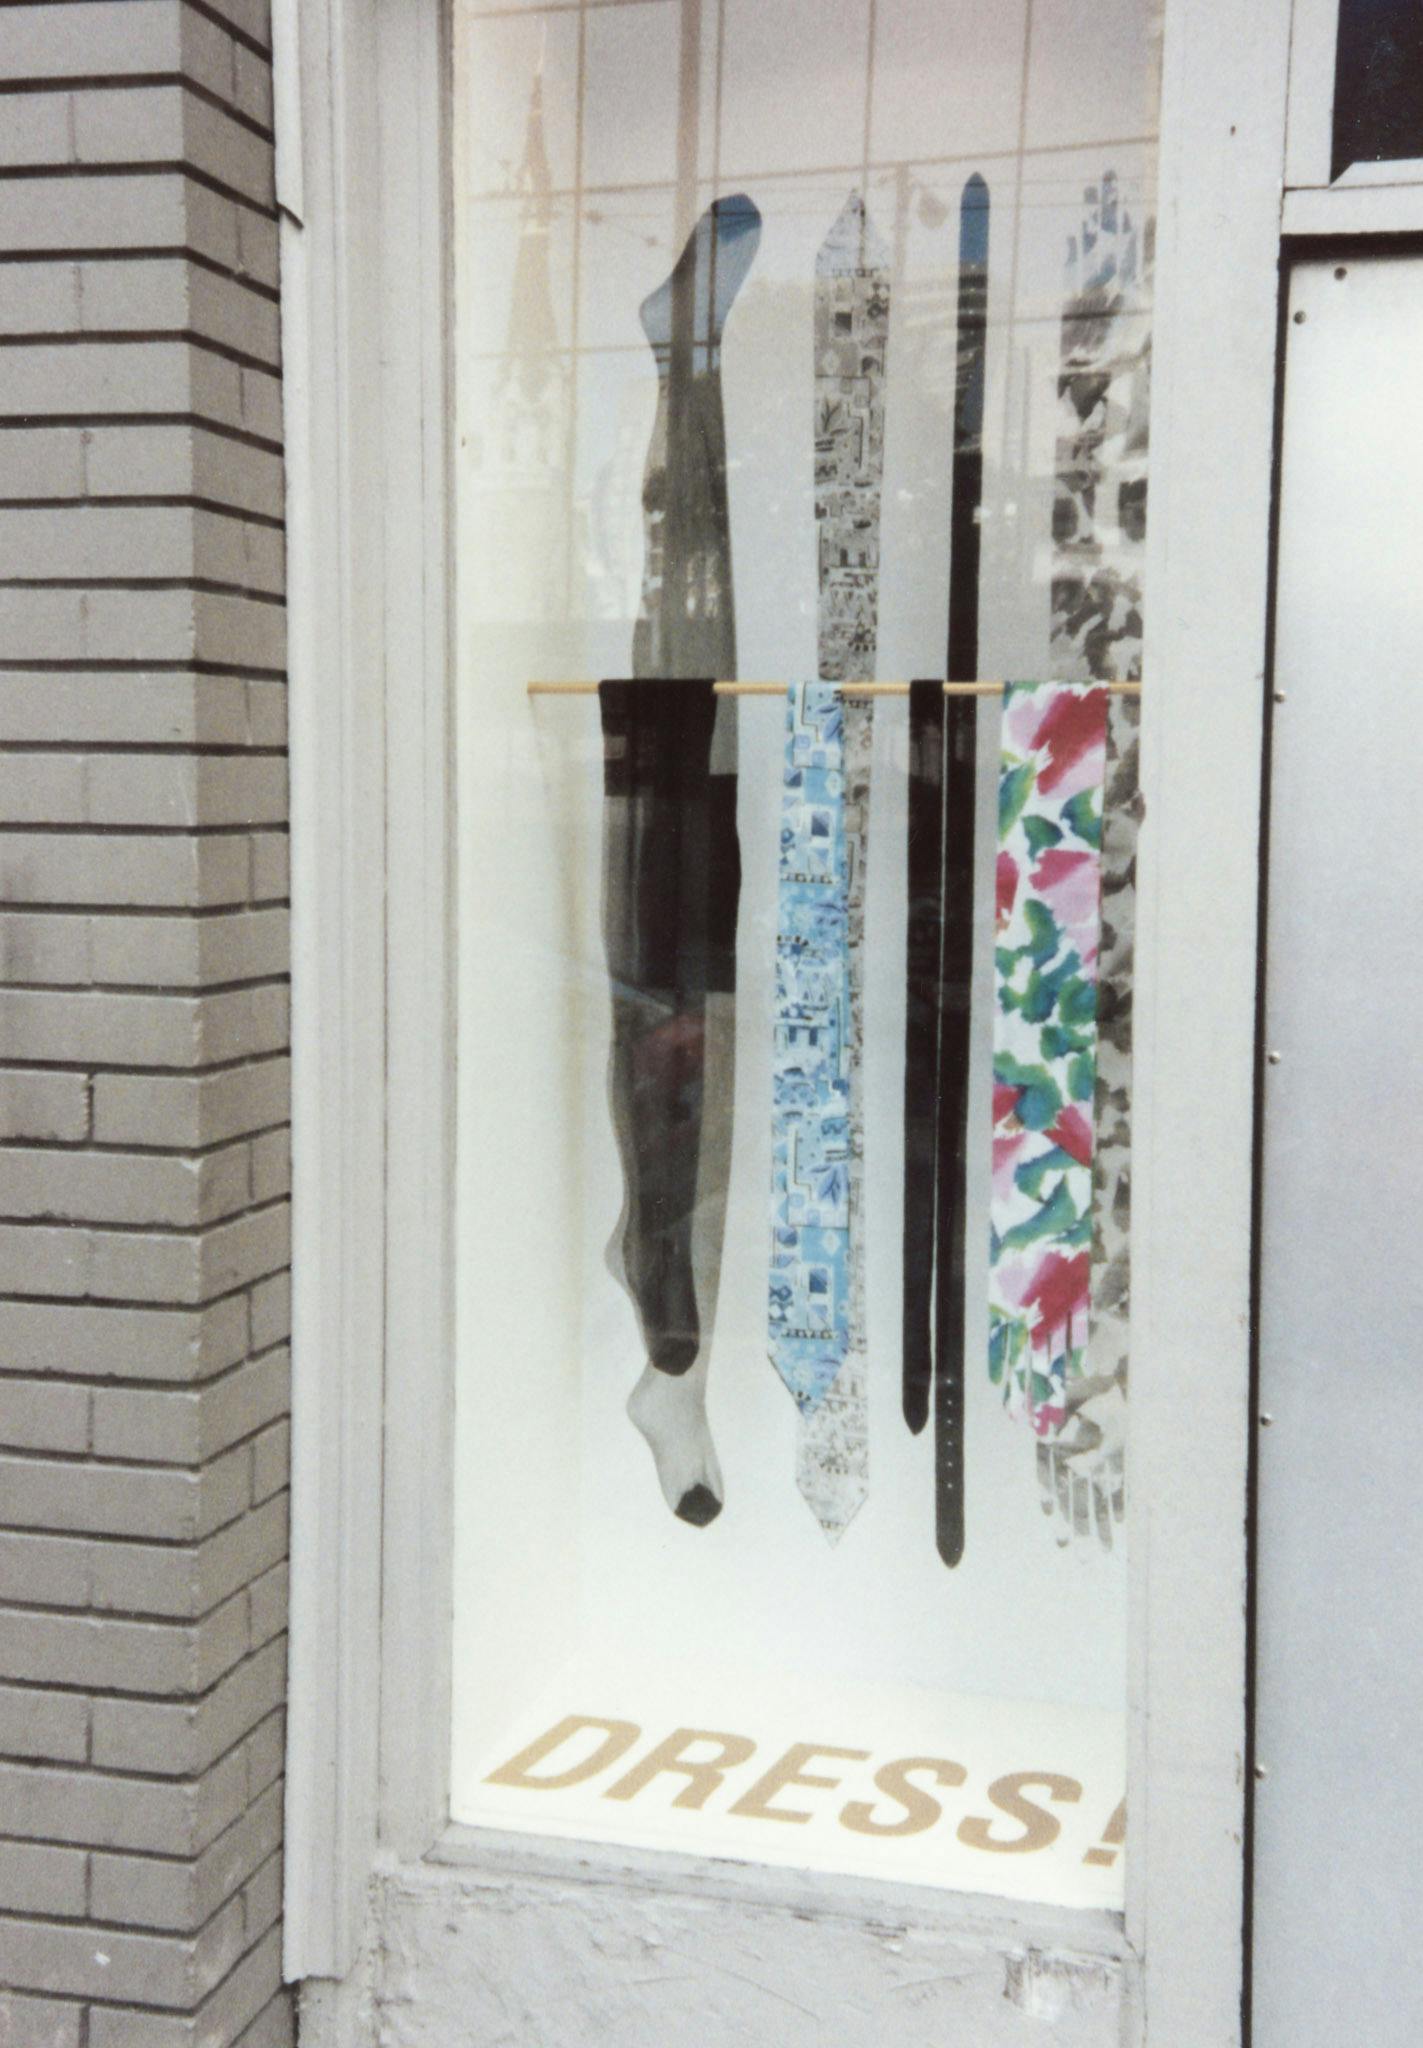 A closeup on an artwork in a window display. The work has two ties, a pair of pantyhose and a belt hanging from a rod. A photo of these items in the background. Large text on the bottom reads "Dress!"